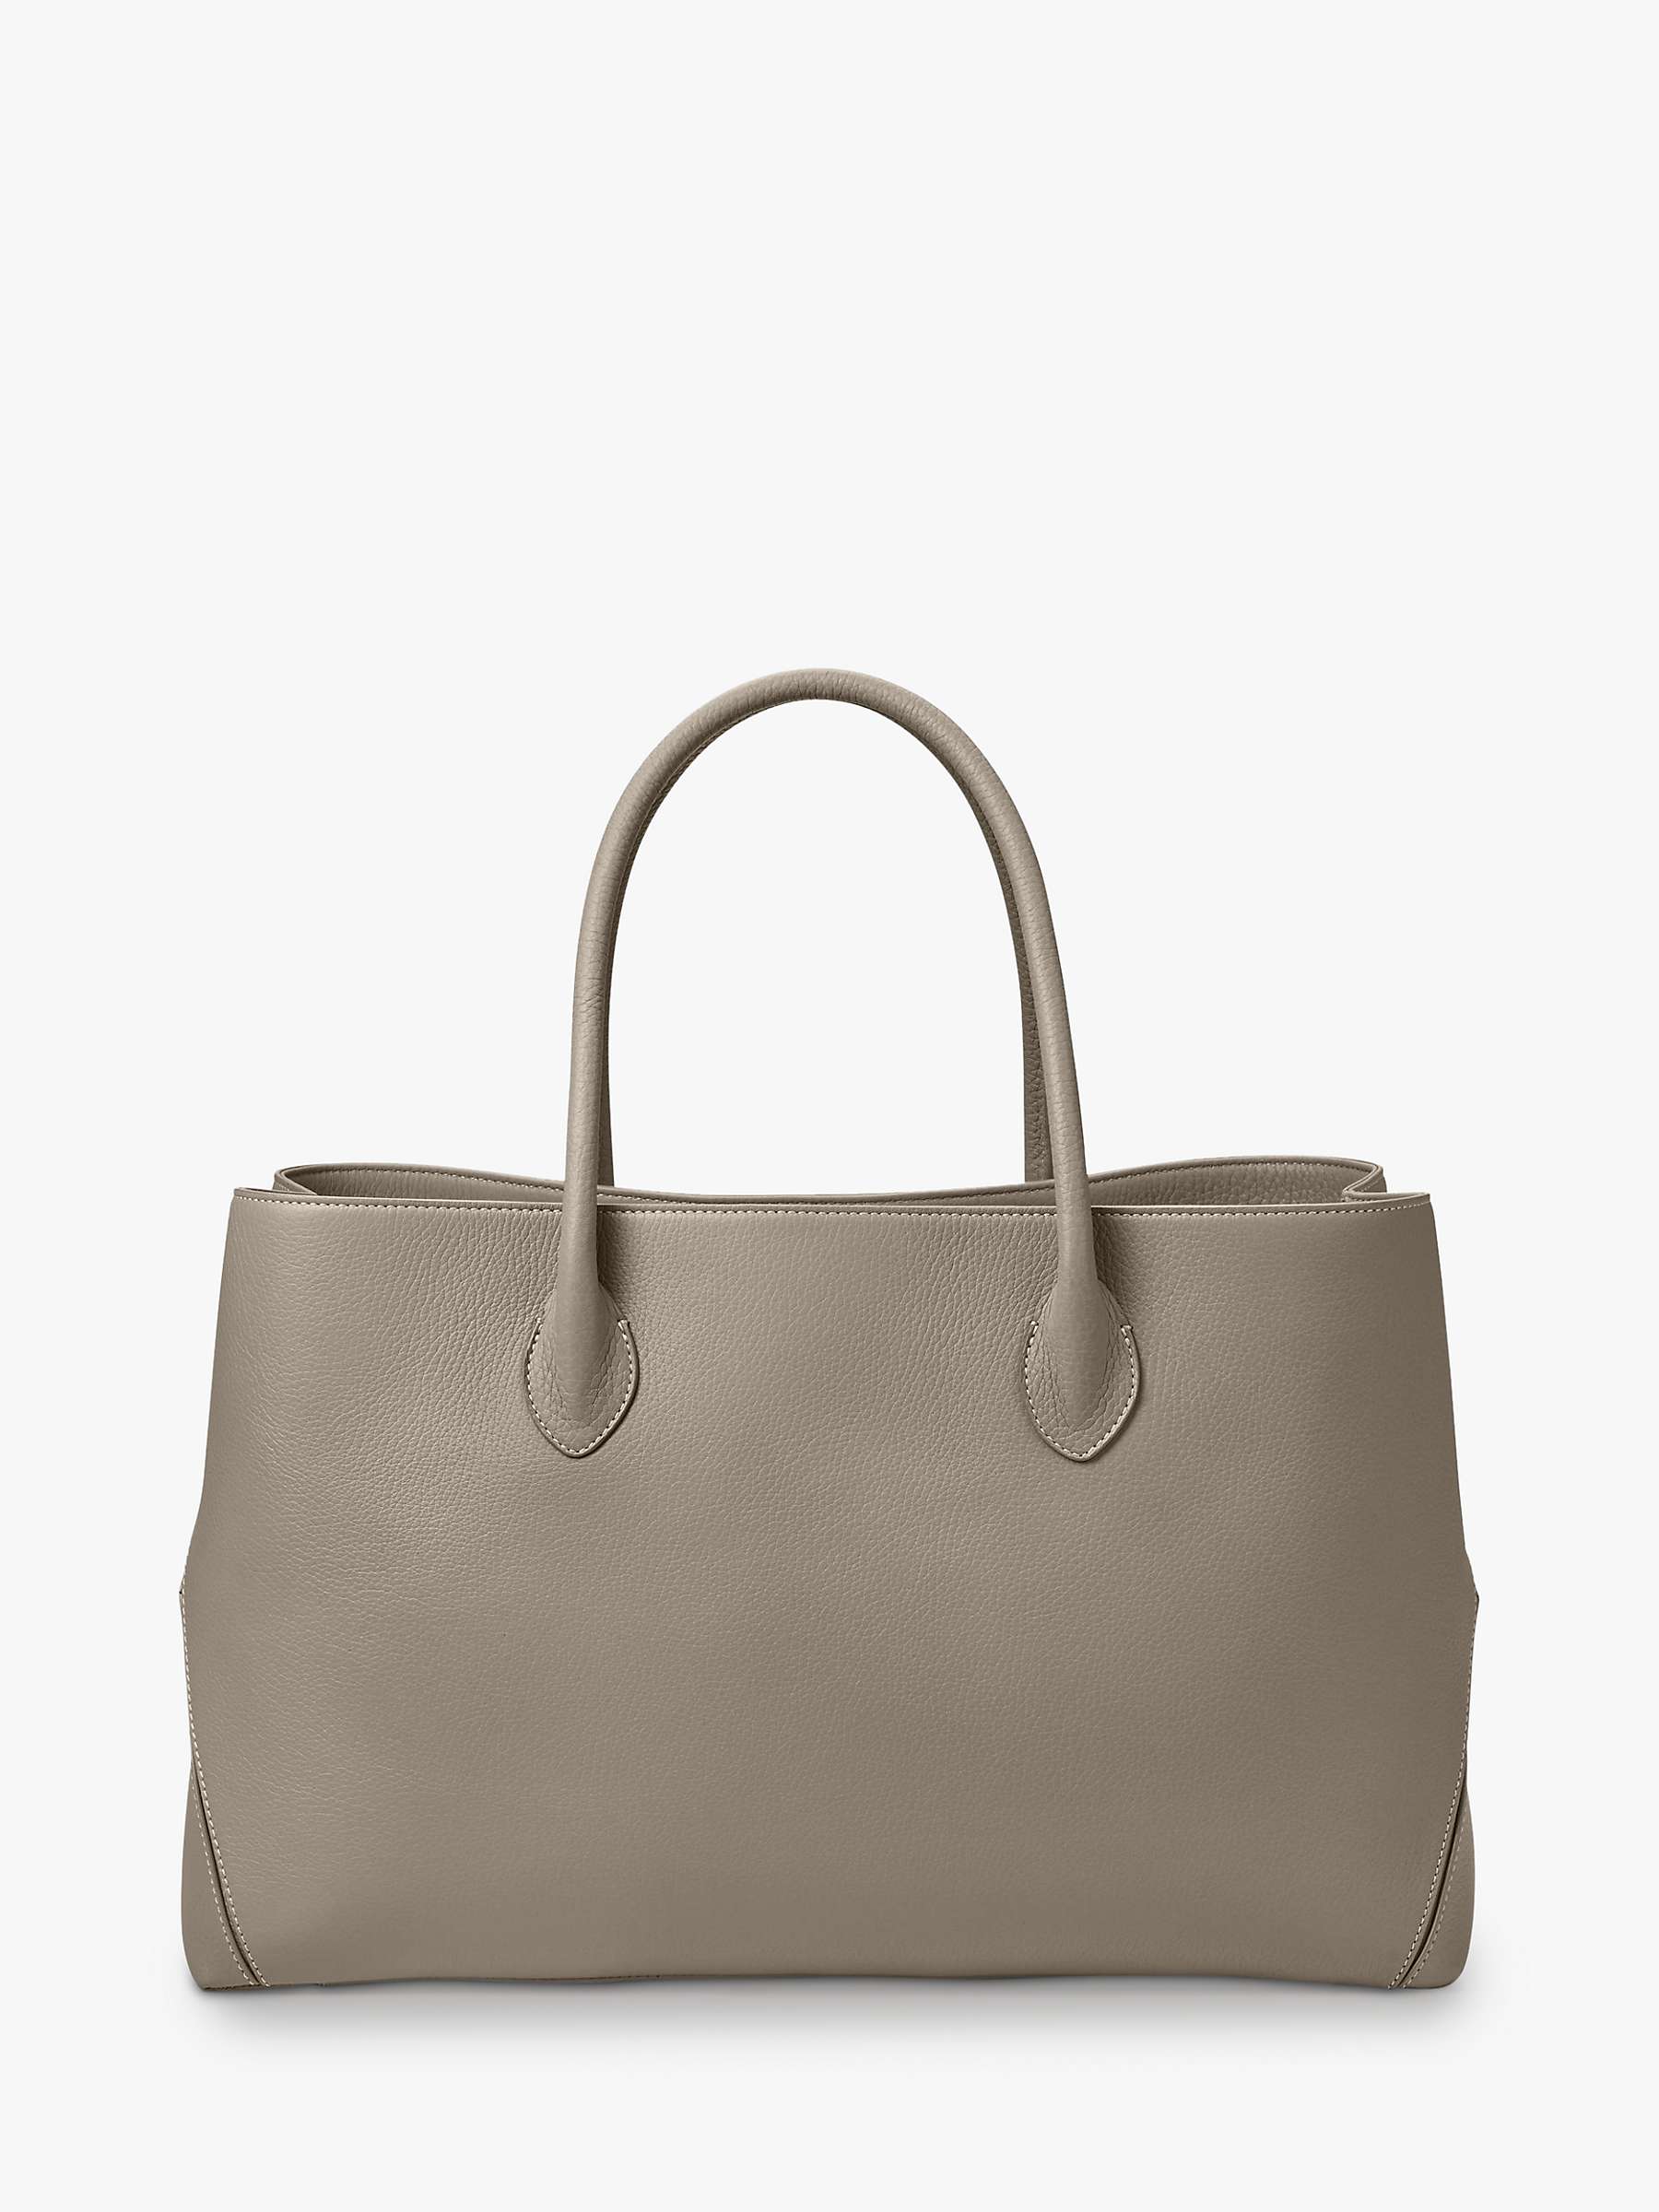 Buy Aspinal of London Large London Pebble Leather Tote Bag Online at johnlewis.com